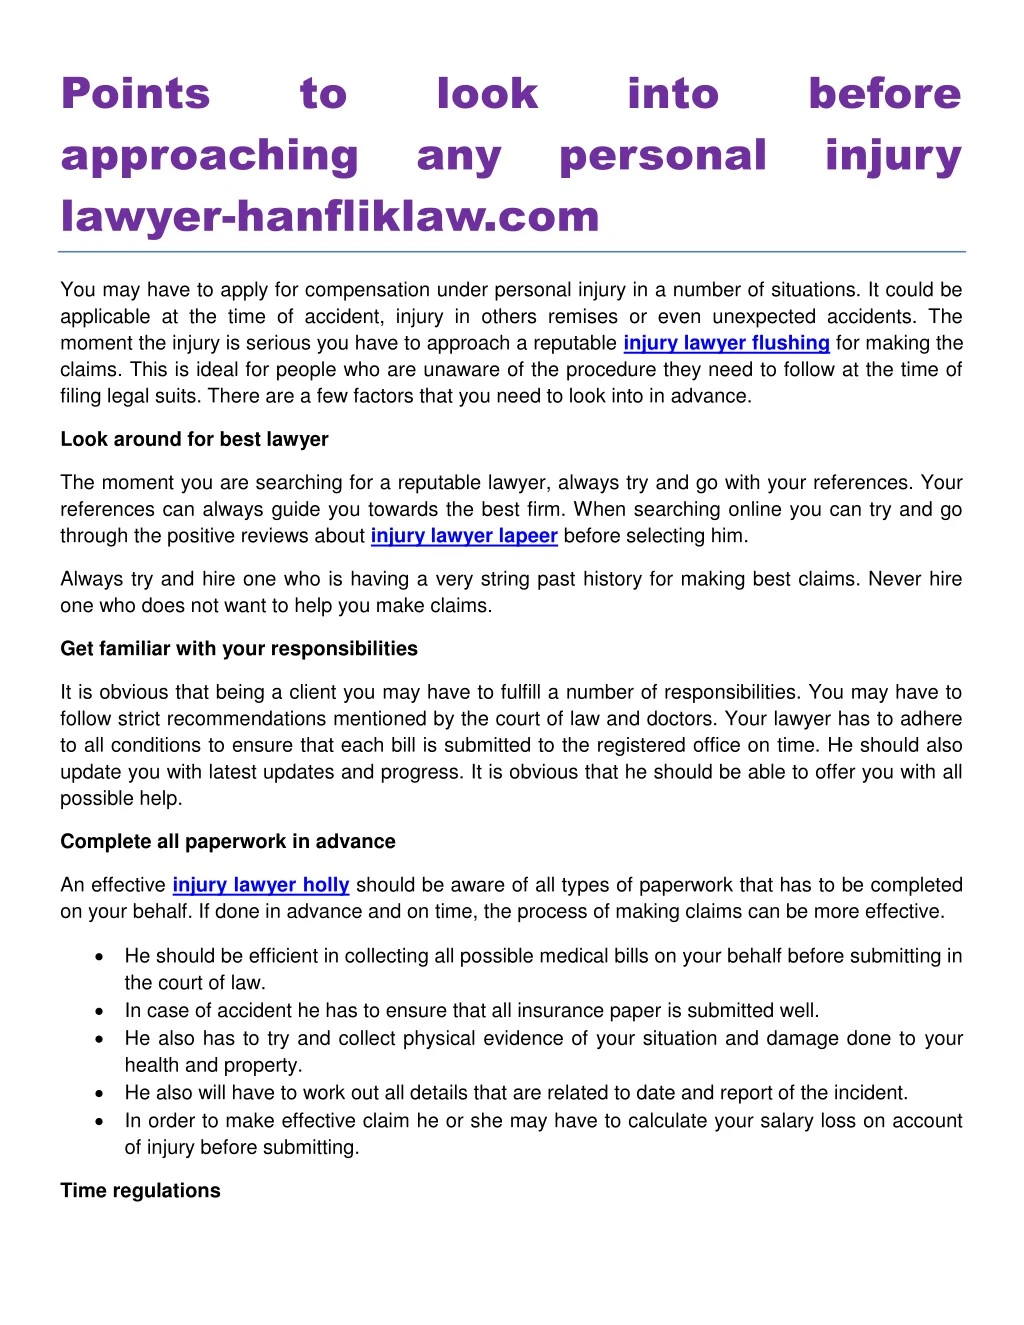 points approaching lawyer hanfliklaw com